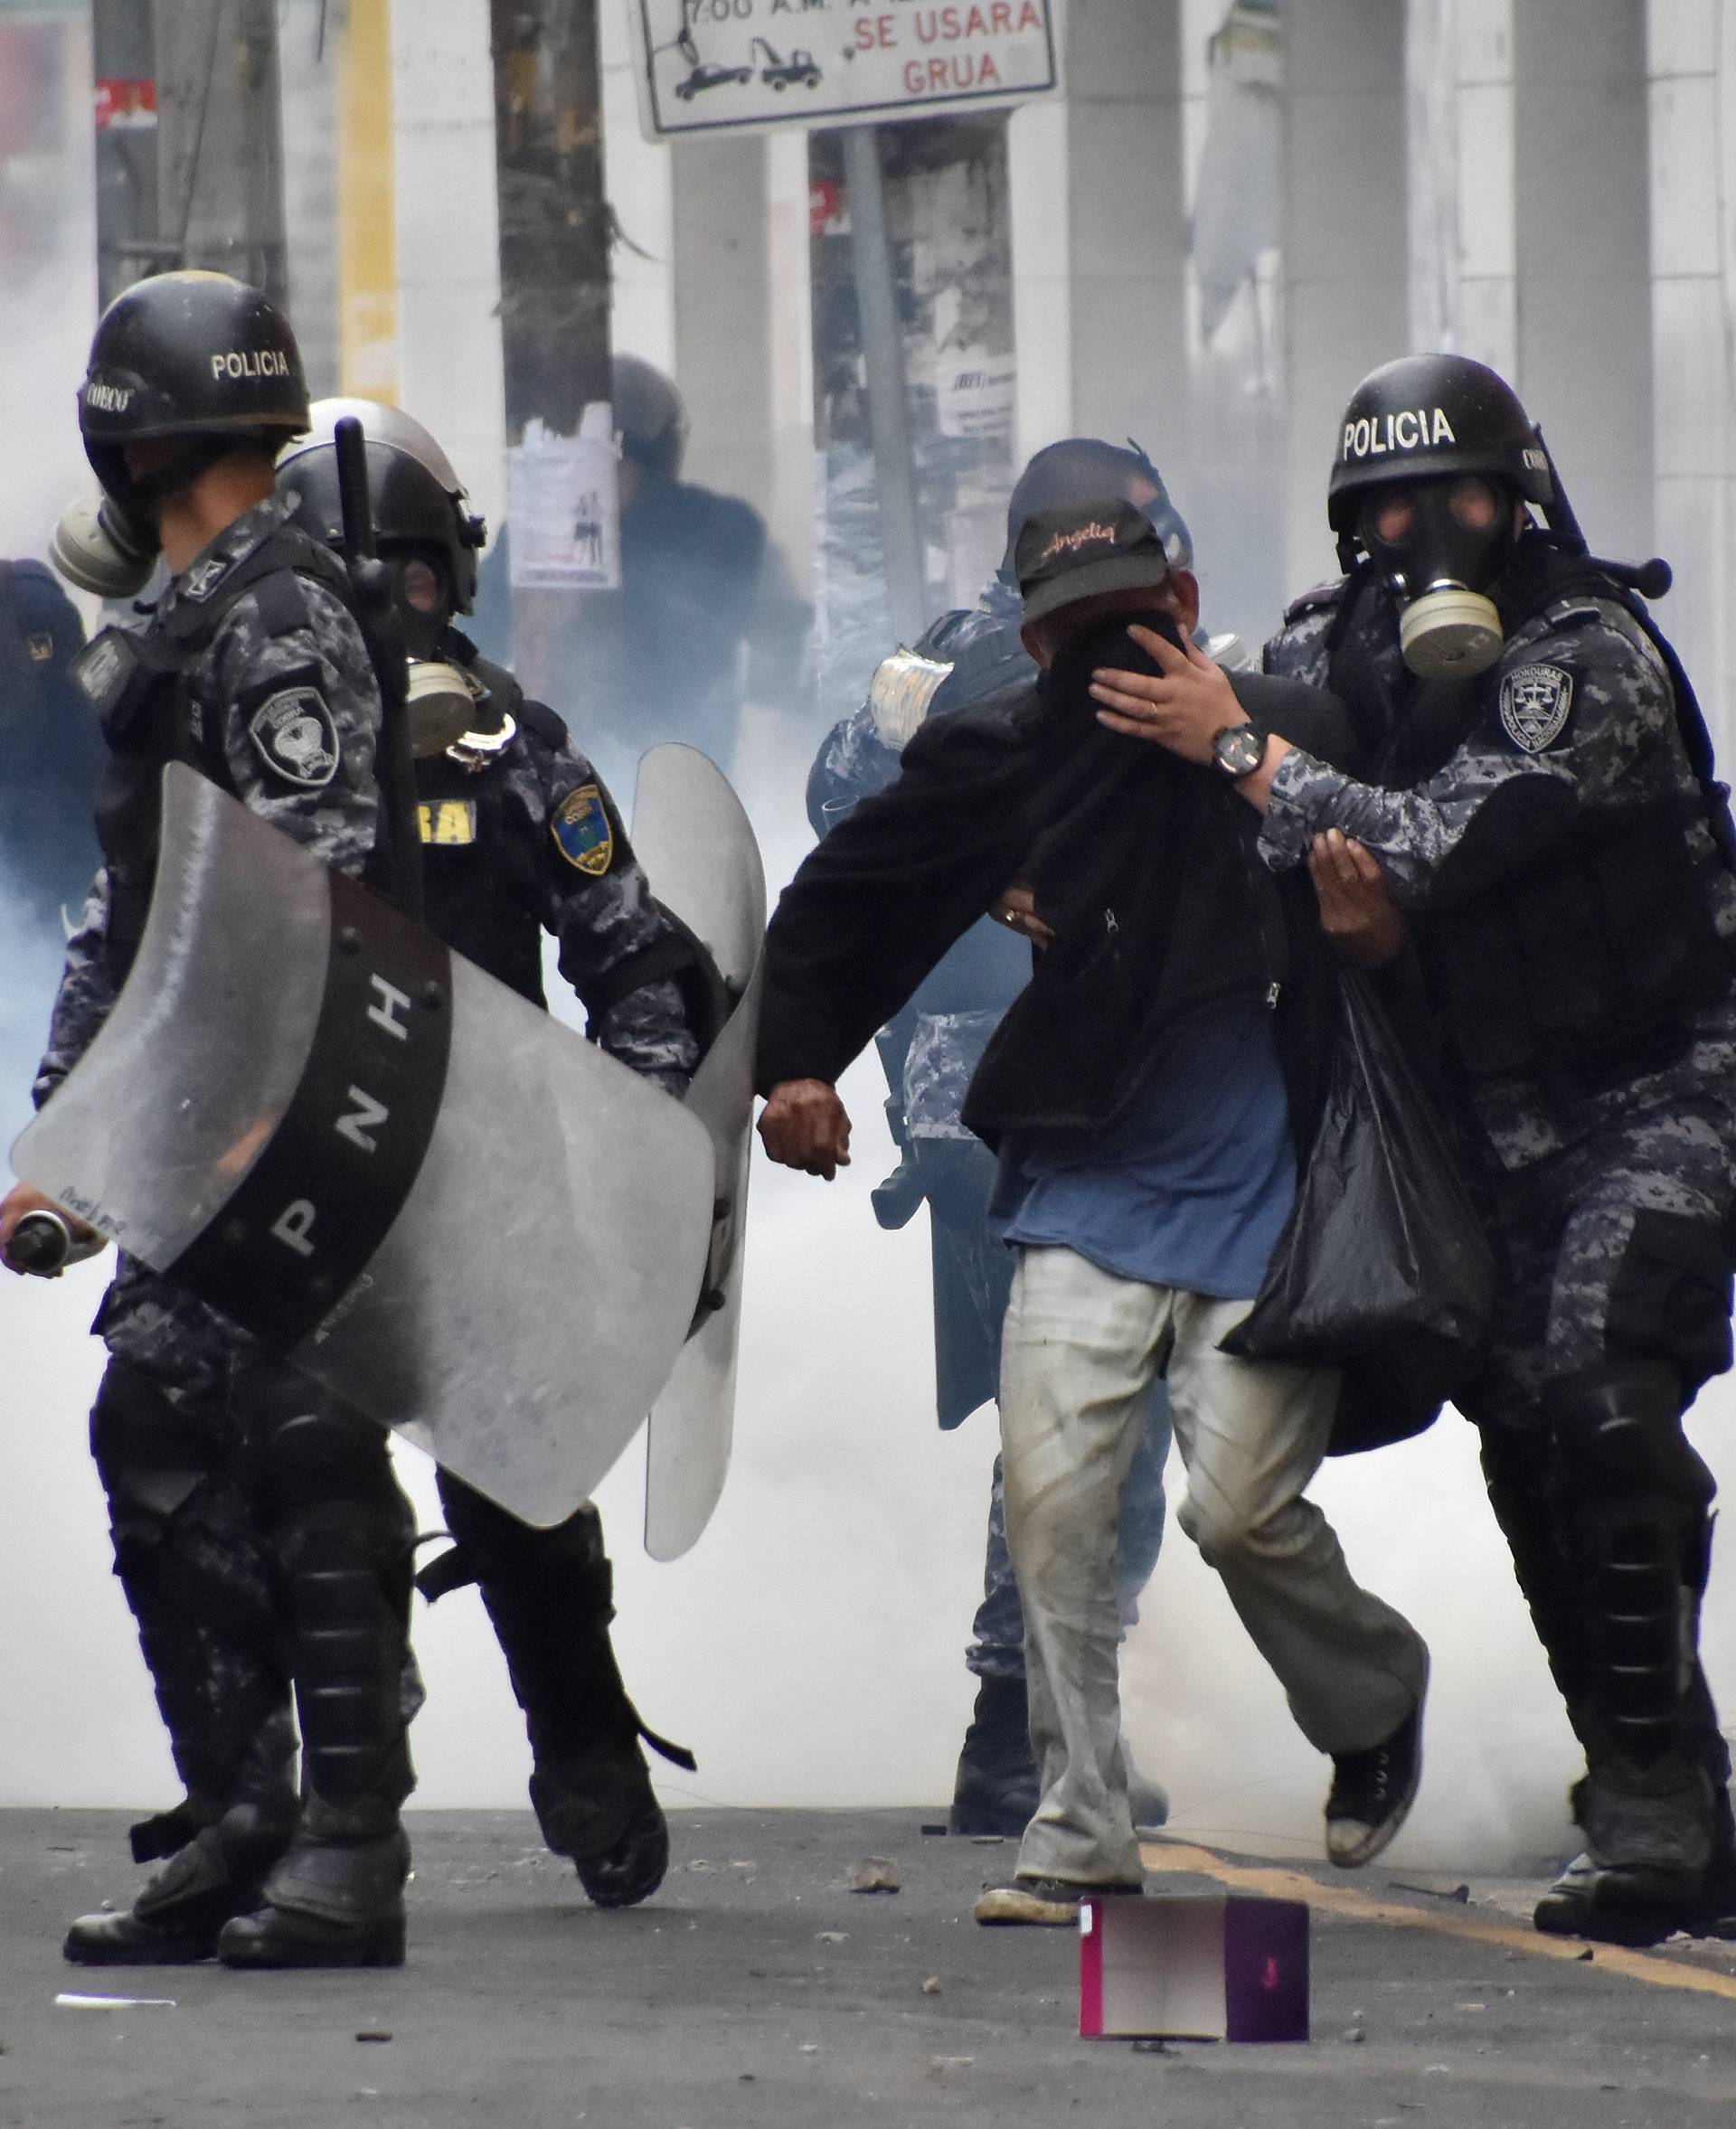 Police help a pedestrian overcome by tear gas as supporters of Nasralla clash with police during a protest caused by the delayed vote count for the presidential election in San Pedro Sula